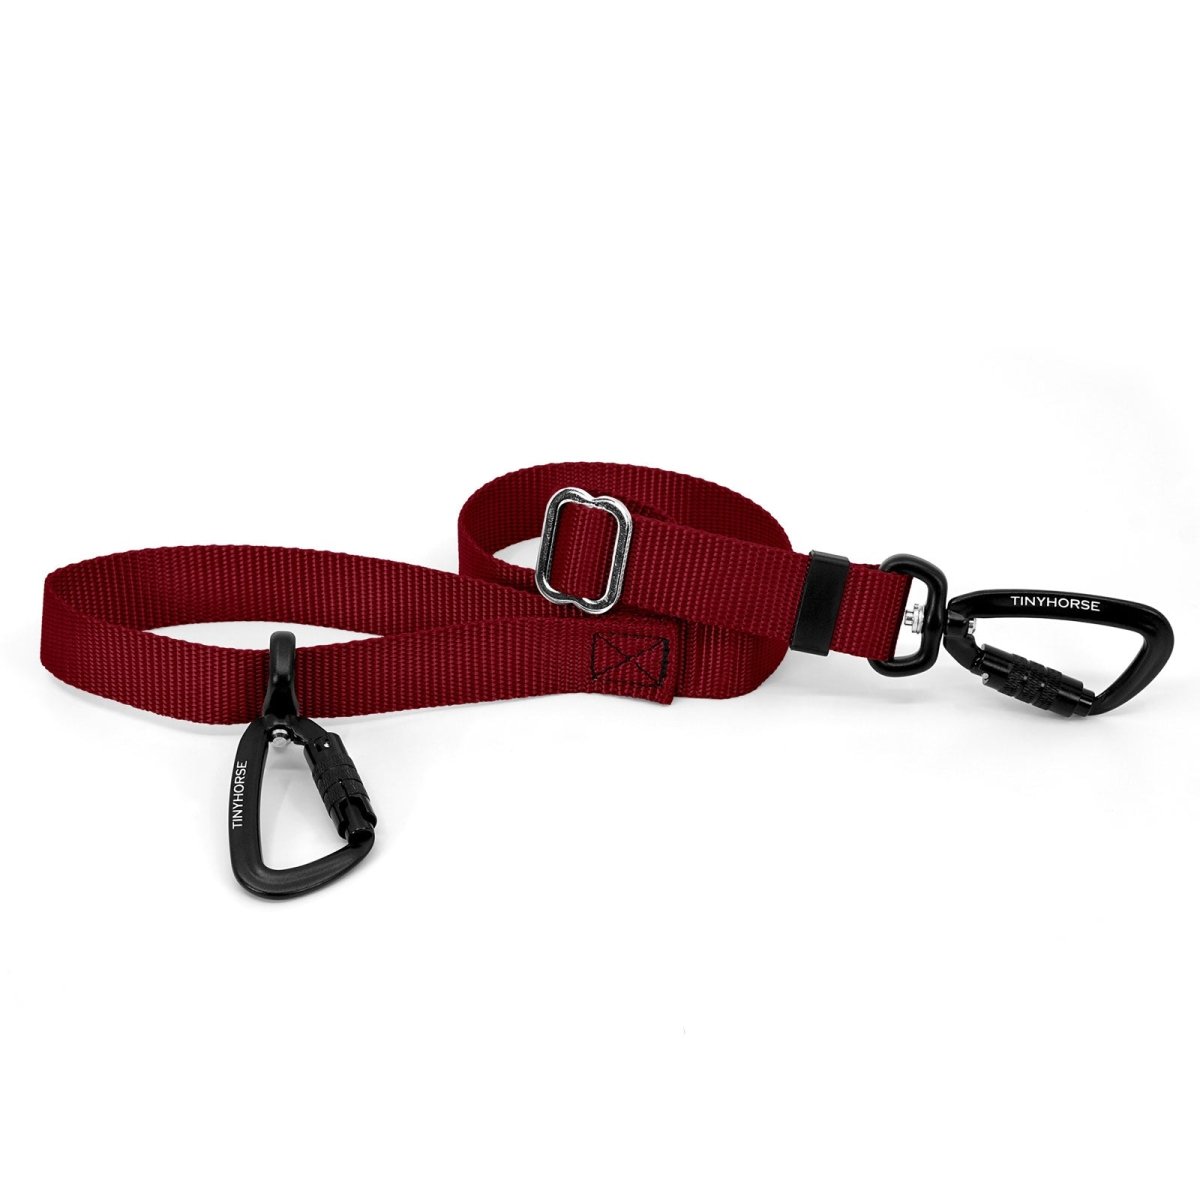 A red-coloured Lead-All Lite with an adjustable nylon webbing leash and 2 auto-locking carabiners